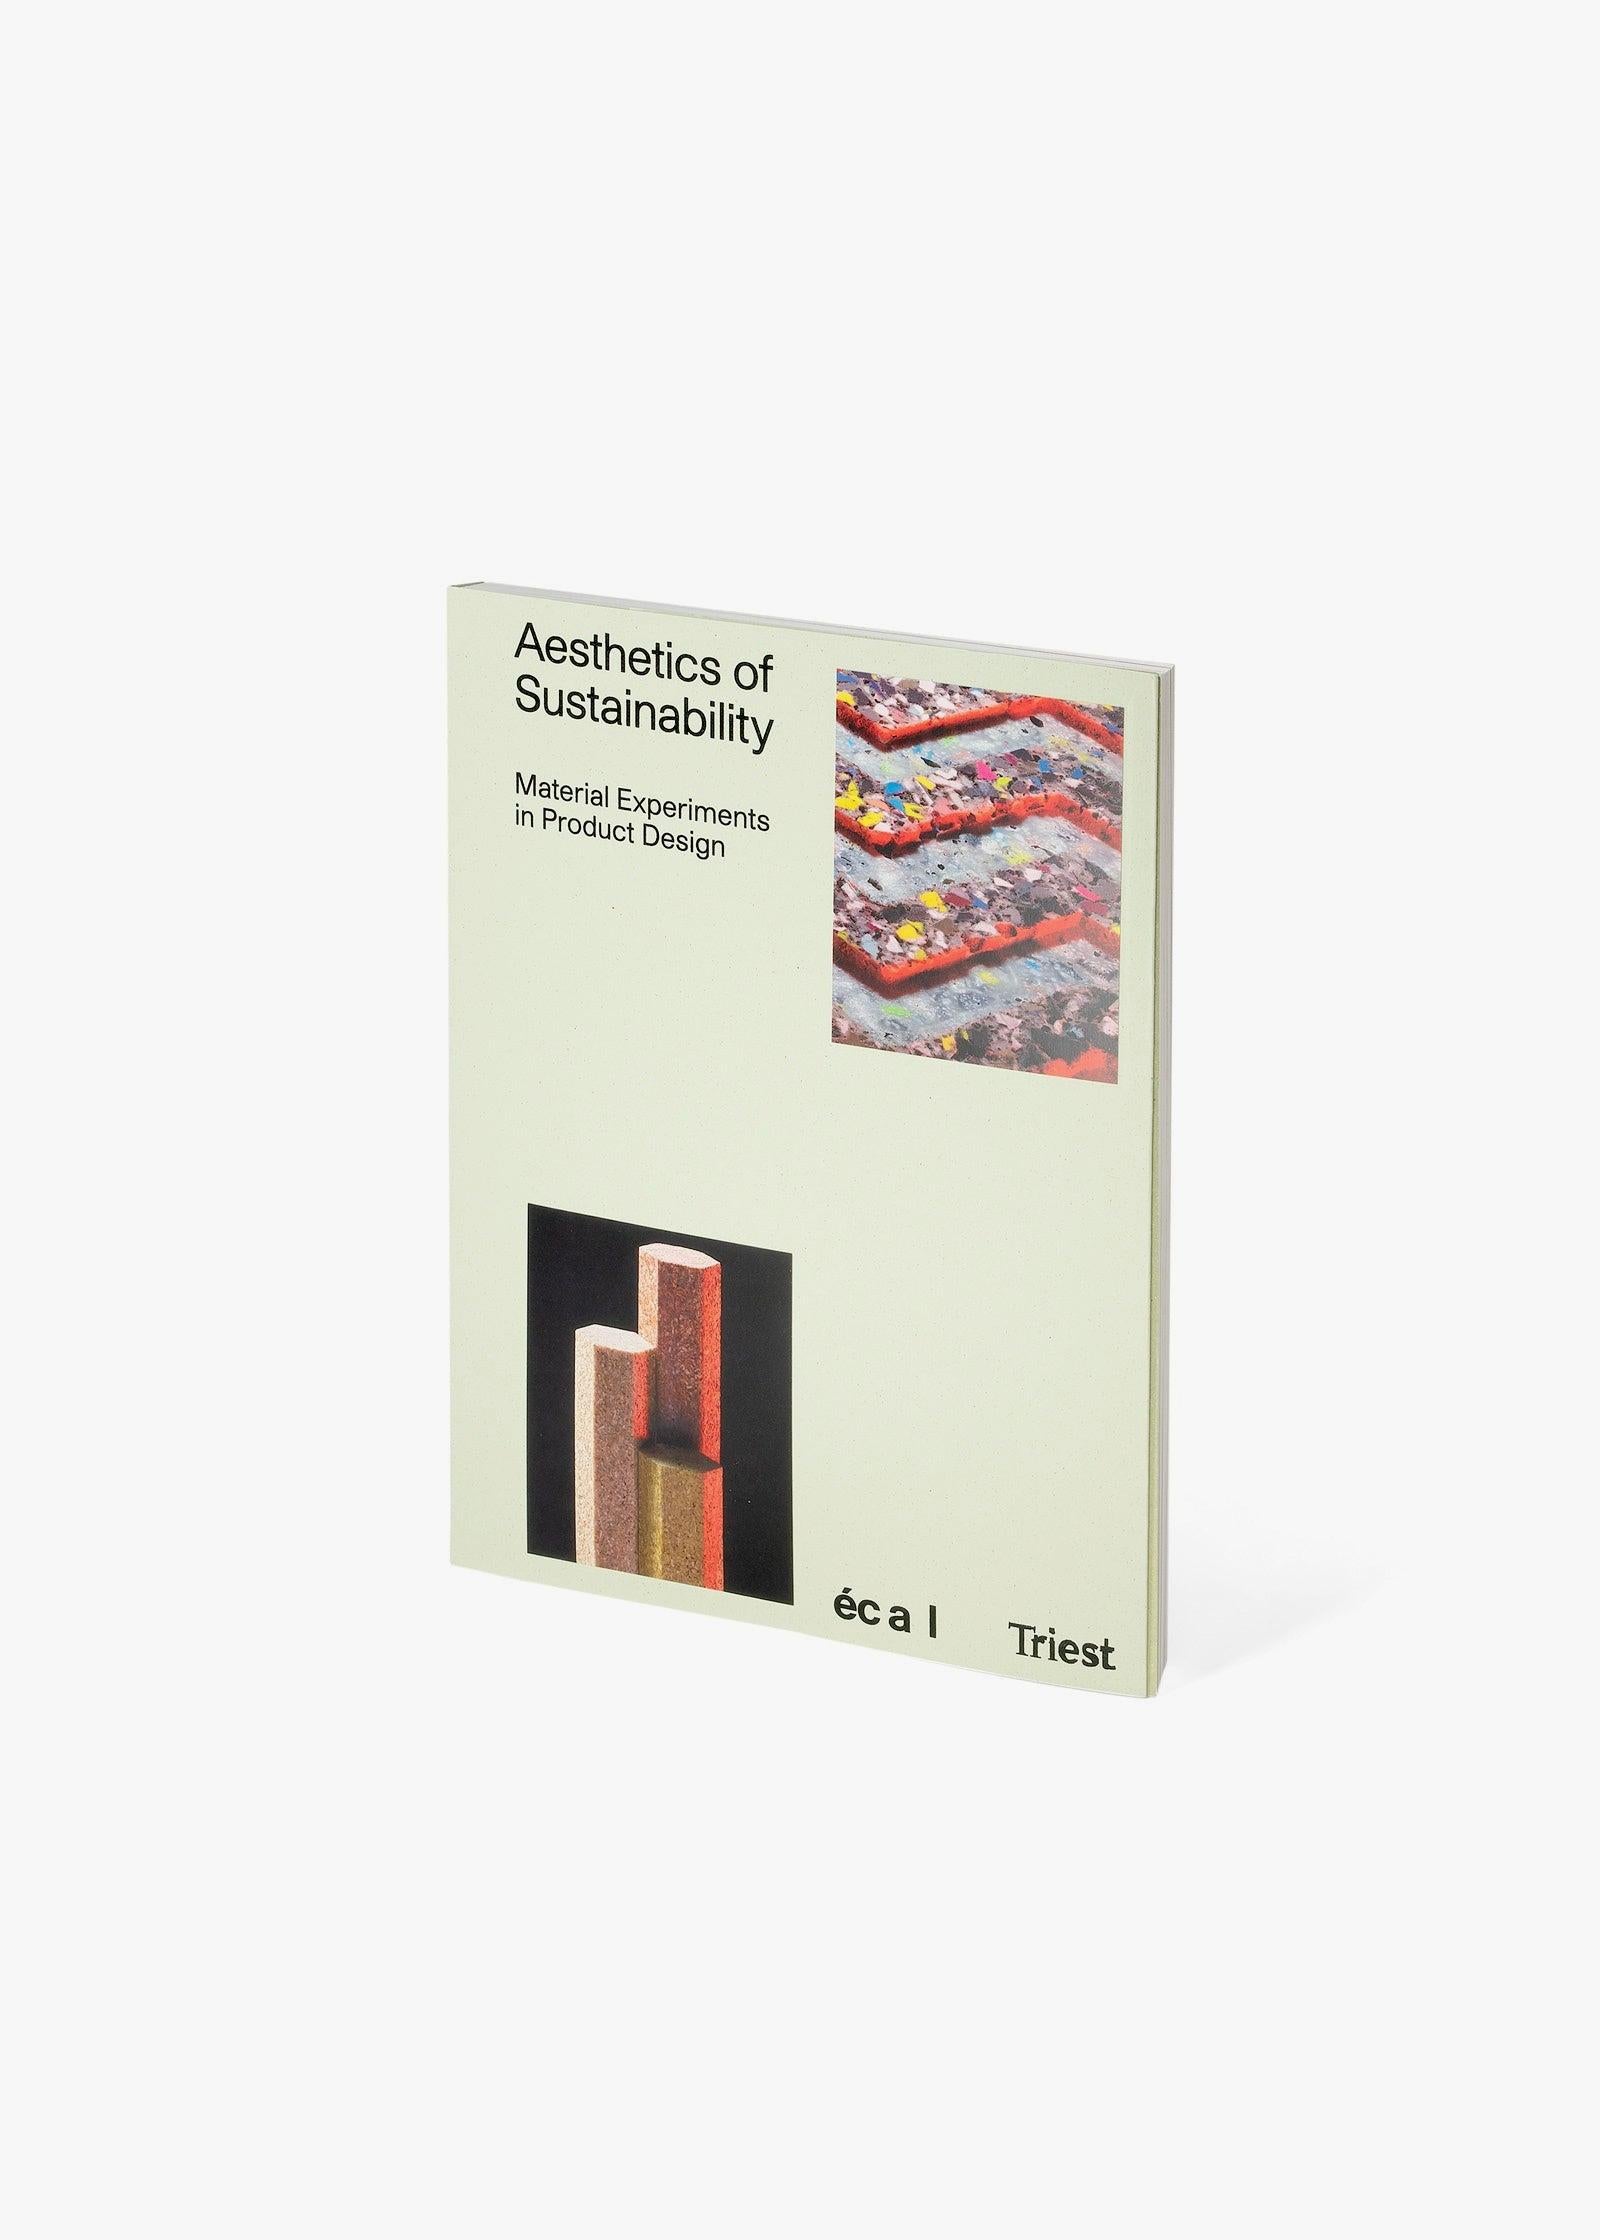 Aesthetics of Sustainabiliy – book - QWSTION